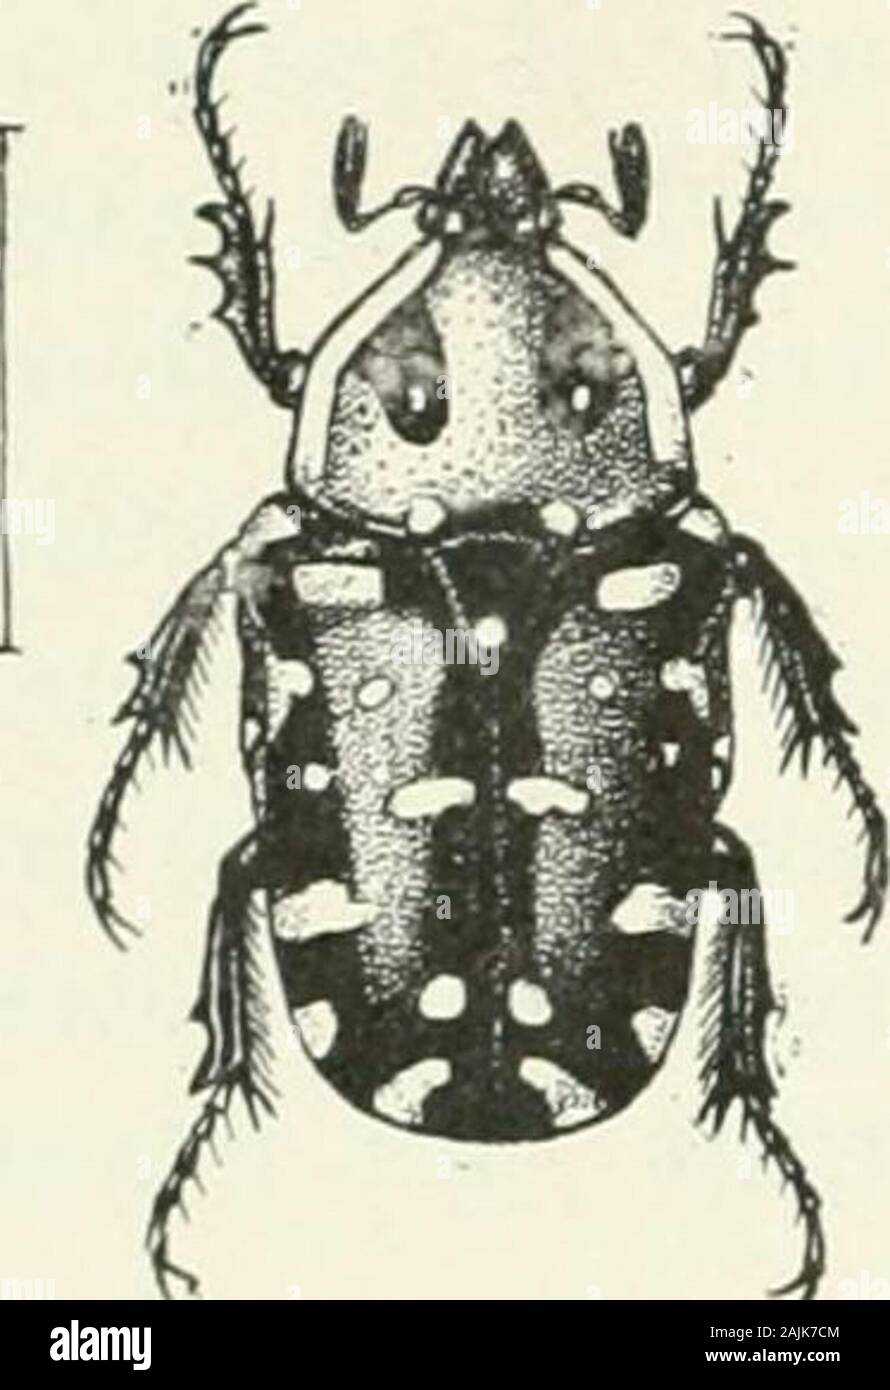 Indian forest insects of economic importance Coleoptera . FAMILY SCARABAEIDAE OXYCETONIA. Oxycetonia versicolor, Fabr. REFERENCE.—Fabr. Syst. Ent. 1775, P- 5i ! Schaum. Ann. Soc. Ent. Fr. 1849, P- 264. Habitat.—Dehra Dun. Common in the plains.Tree Attacked.—Rose-bushes. Beetle.—Shining, small, reddish coppery ; margins of thorax, elytra, also along thesuture of the elytra, green ; dorsal surface ofthe insect covered with small white spots,being especially numerous on the elytra.Length, 18 mm.. FIG. 54.—Oxyce-tonia versi-color, var. a.(From F. B. I.) Not very much appears to beknown about theLi Stock Photo